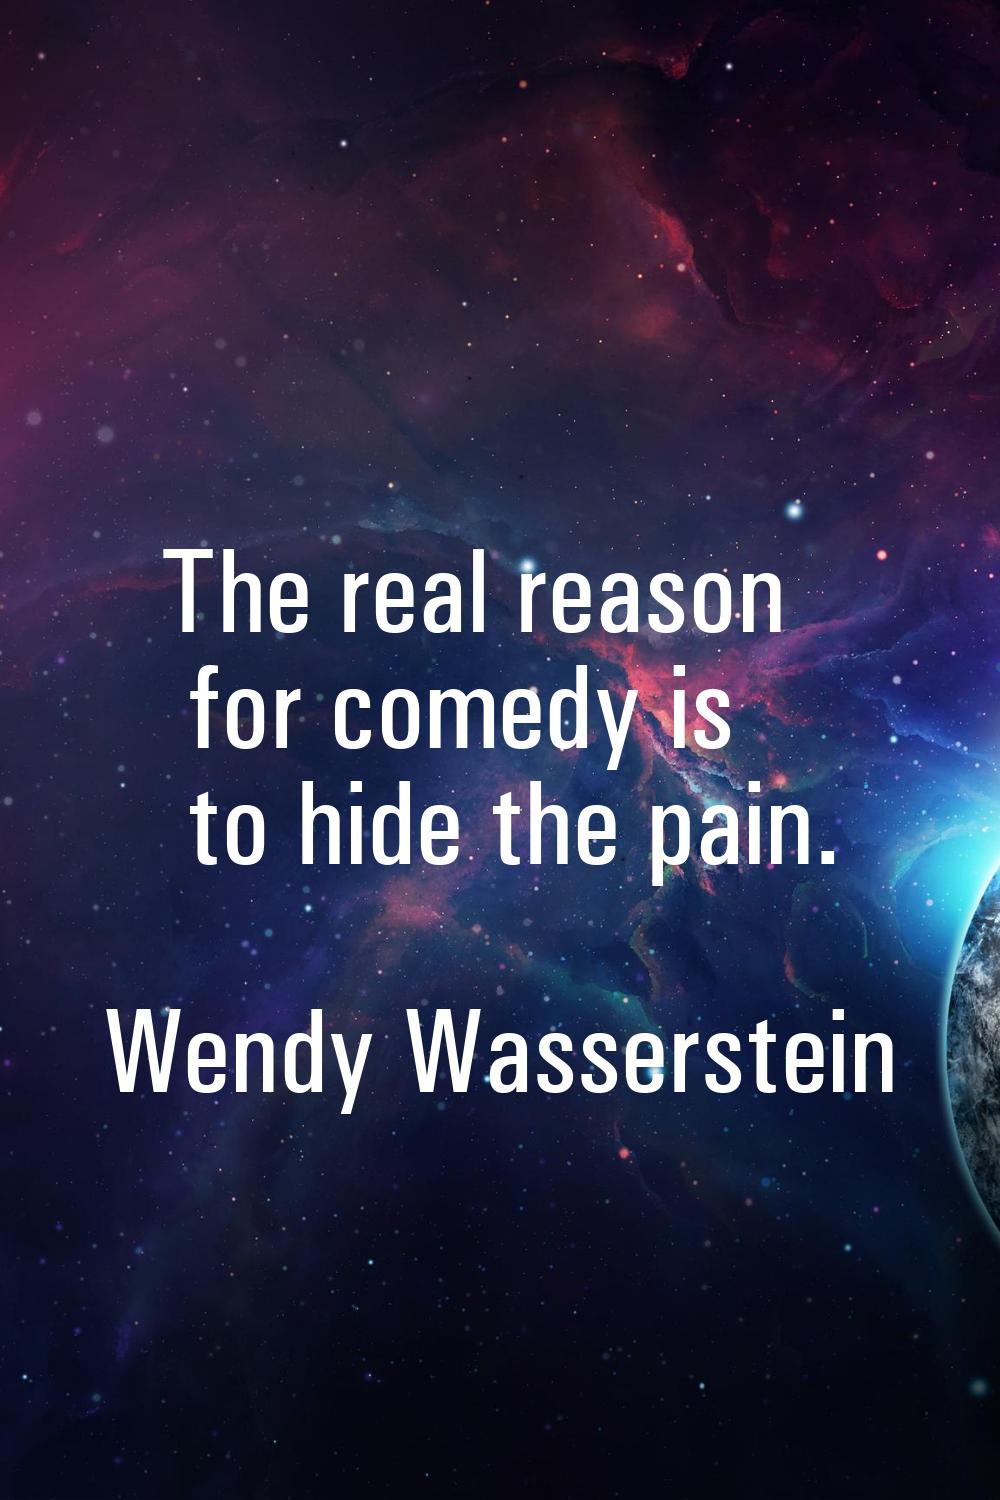 The real reason for comedy is to hide the pain.